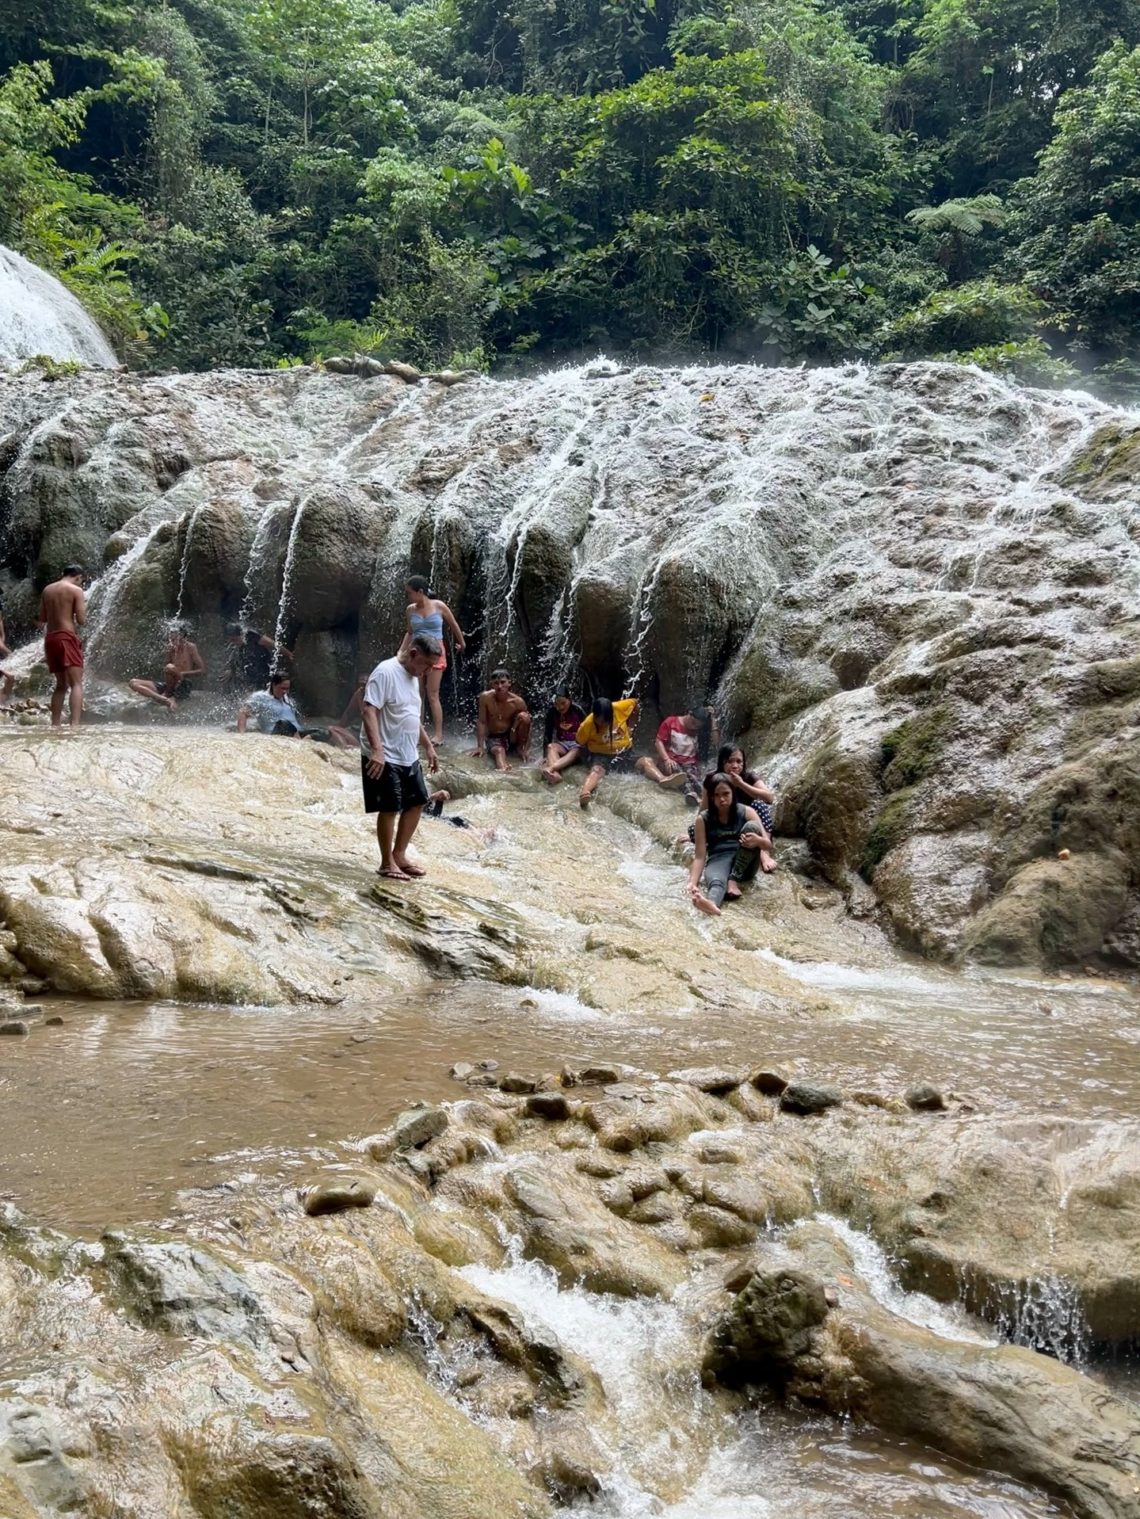 People sitting and standing in waterfall hotsprings